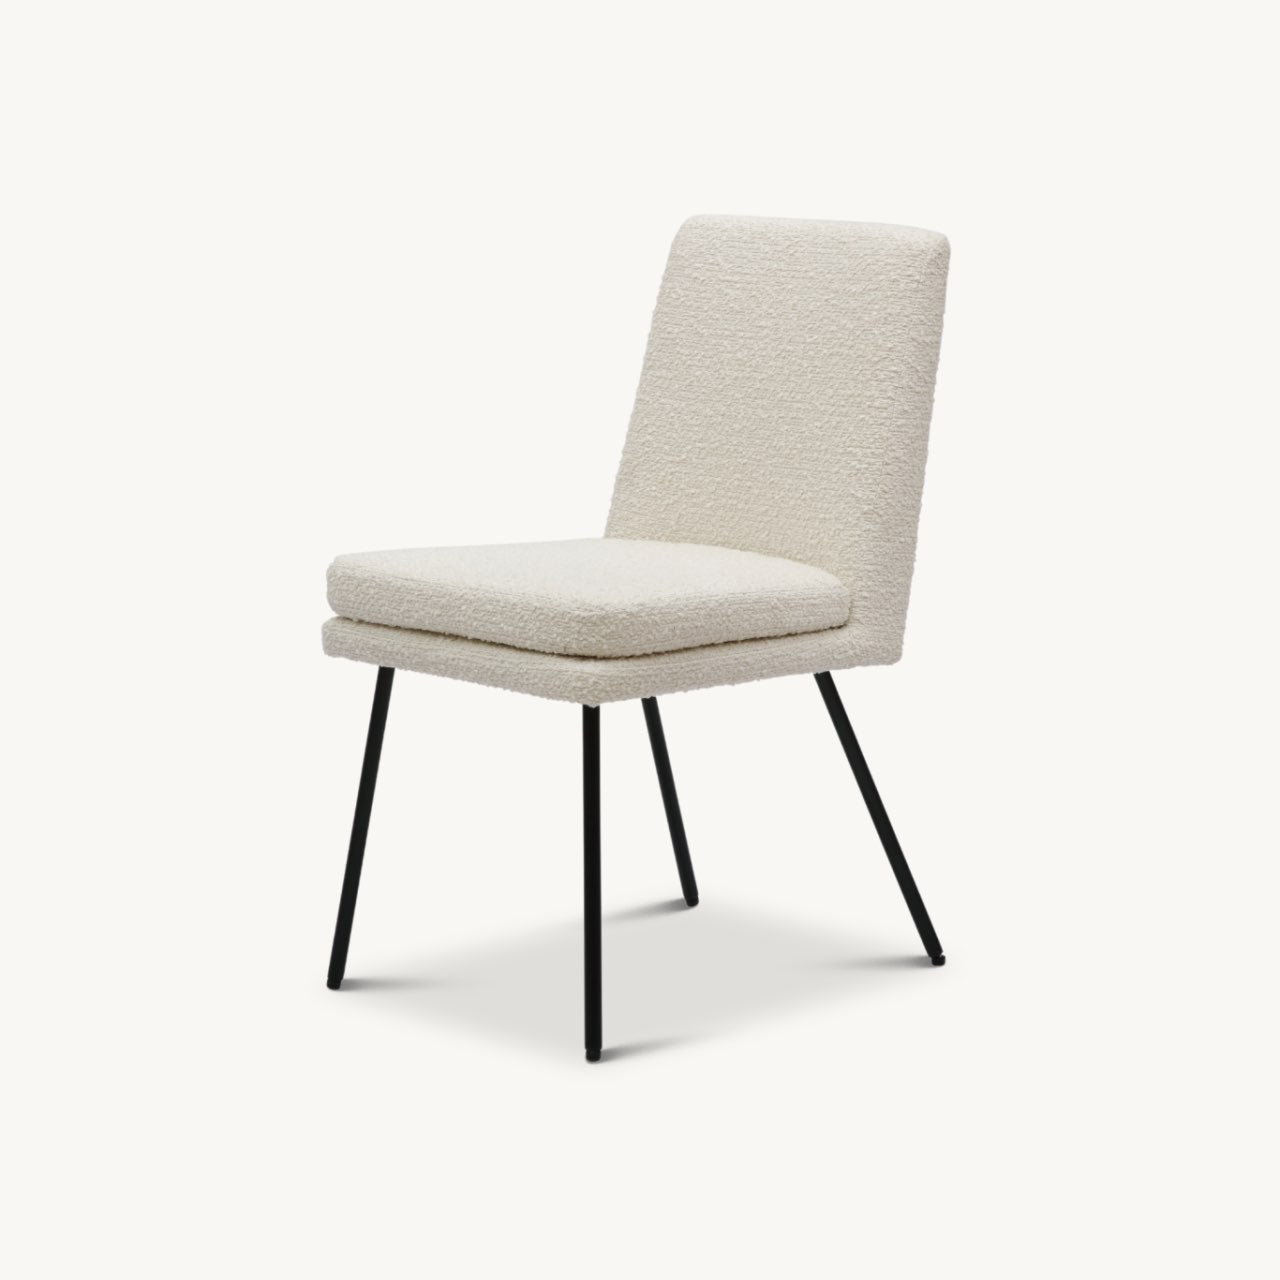 comfortable, fully upholstered minimal dining chair in ivory boucle fabric